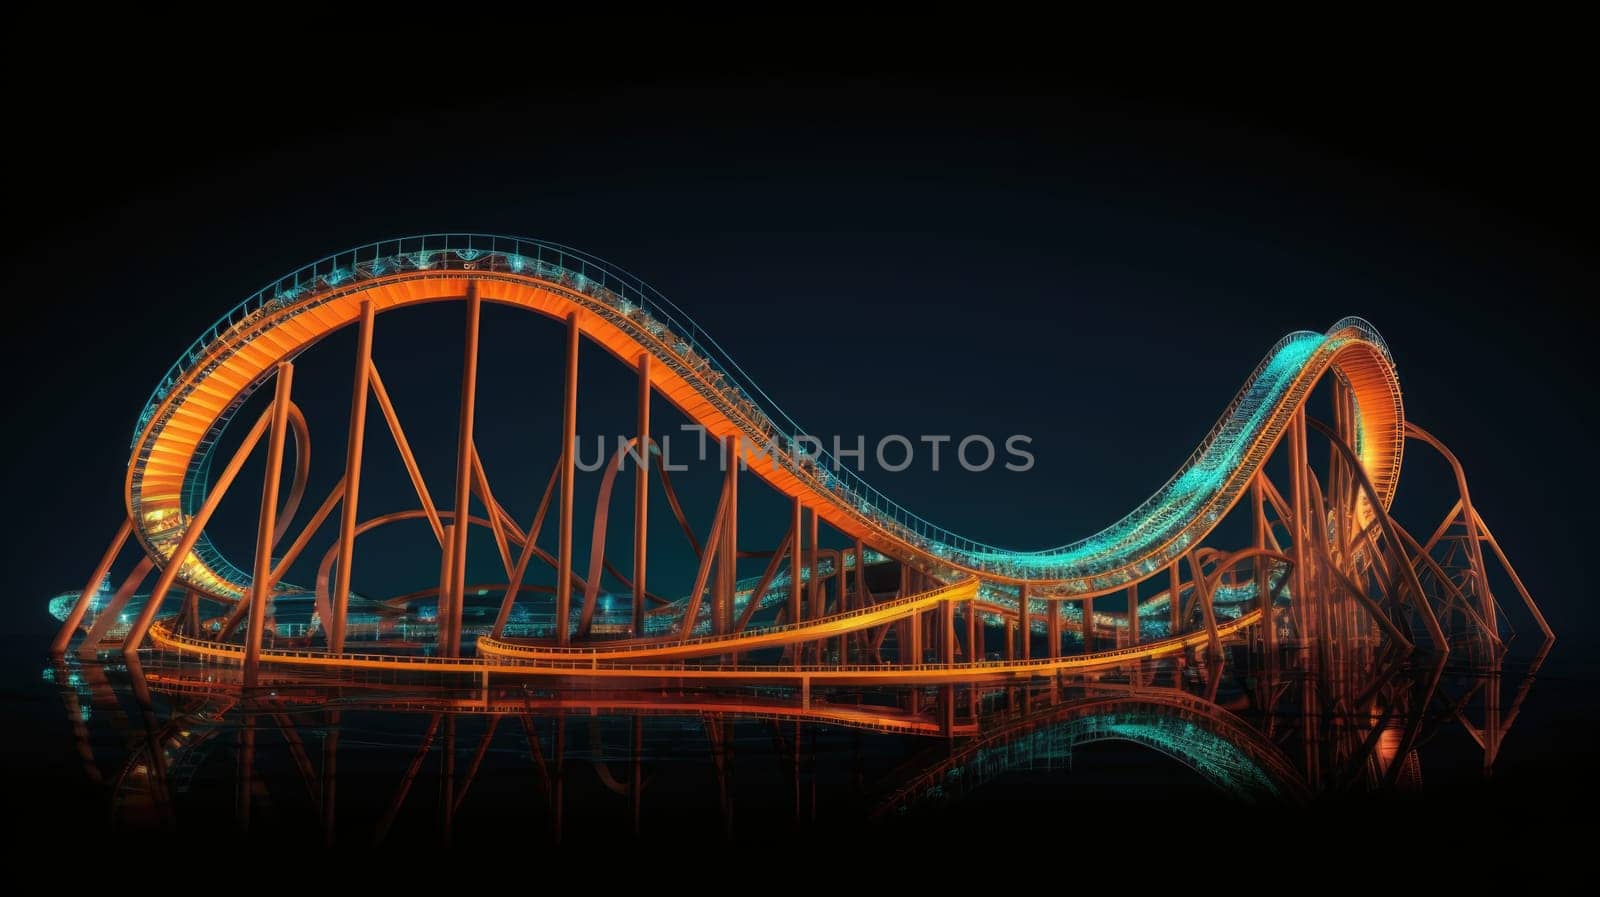 Amusement park with roller coaster at night with bright colorful neon lights by JuliaDorian